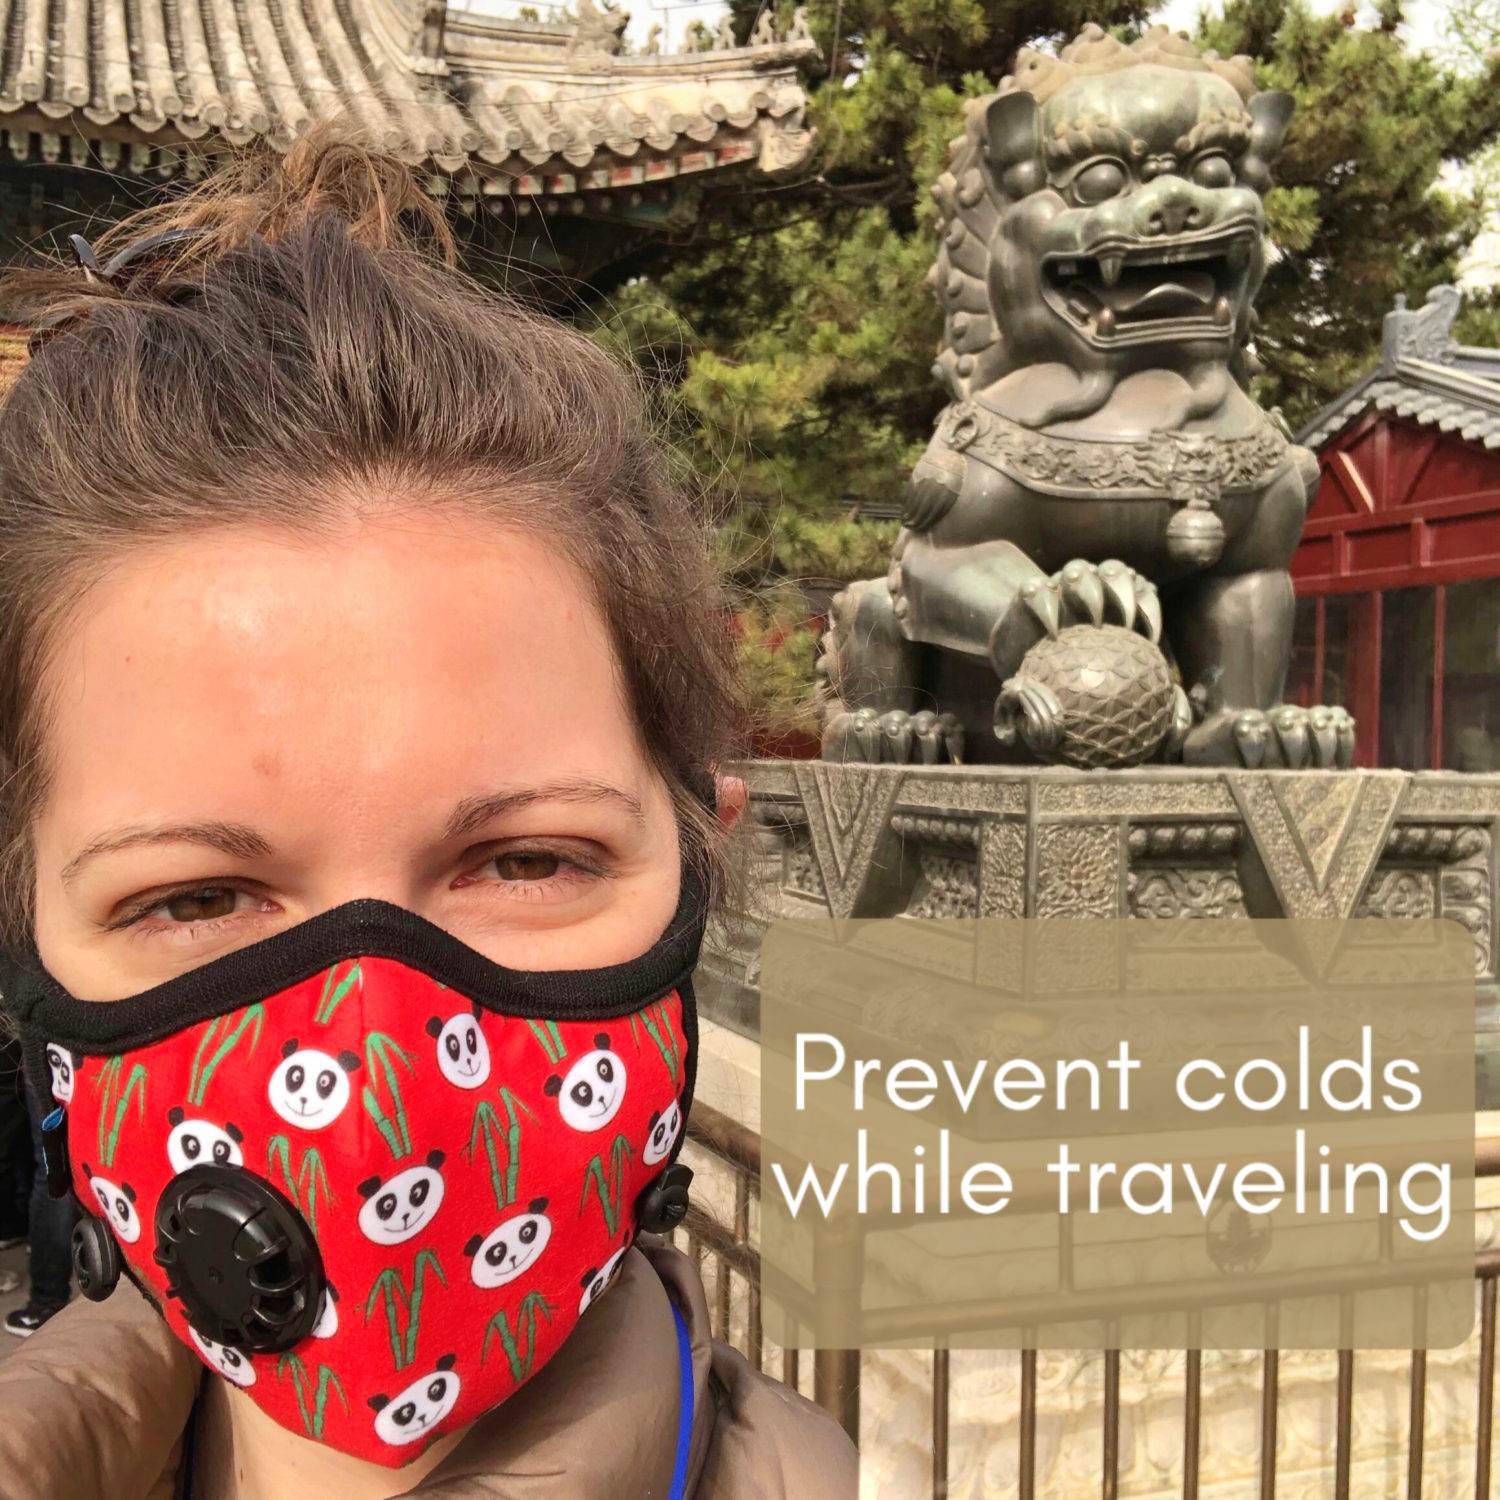 Avoid Getting Sick While Traveling and Prevent Getting Sick